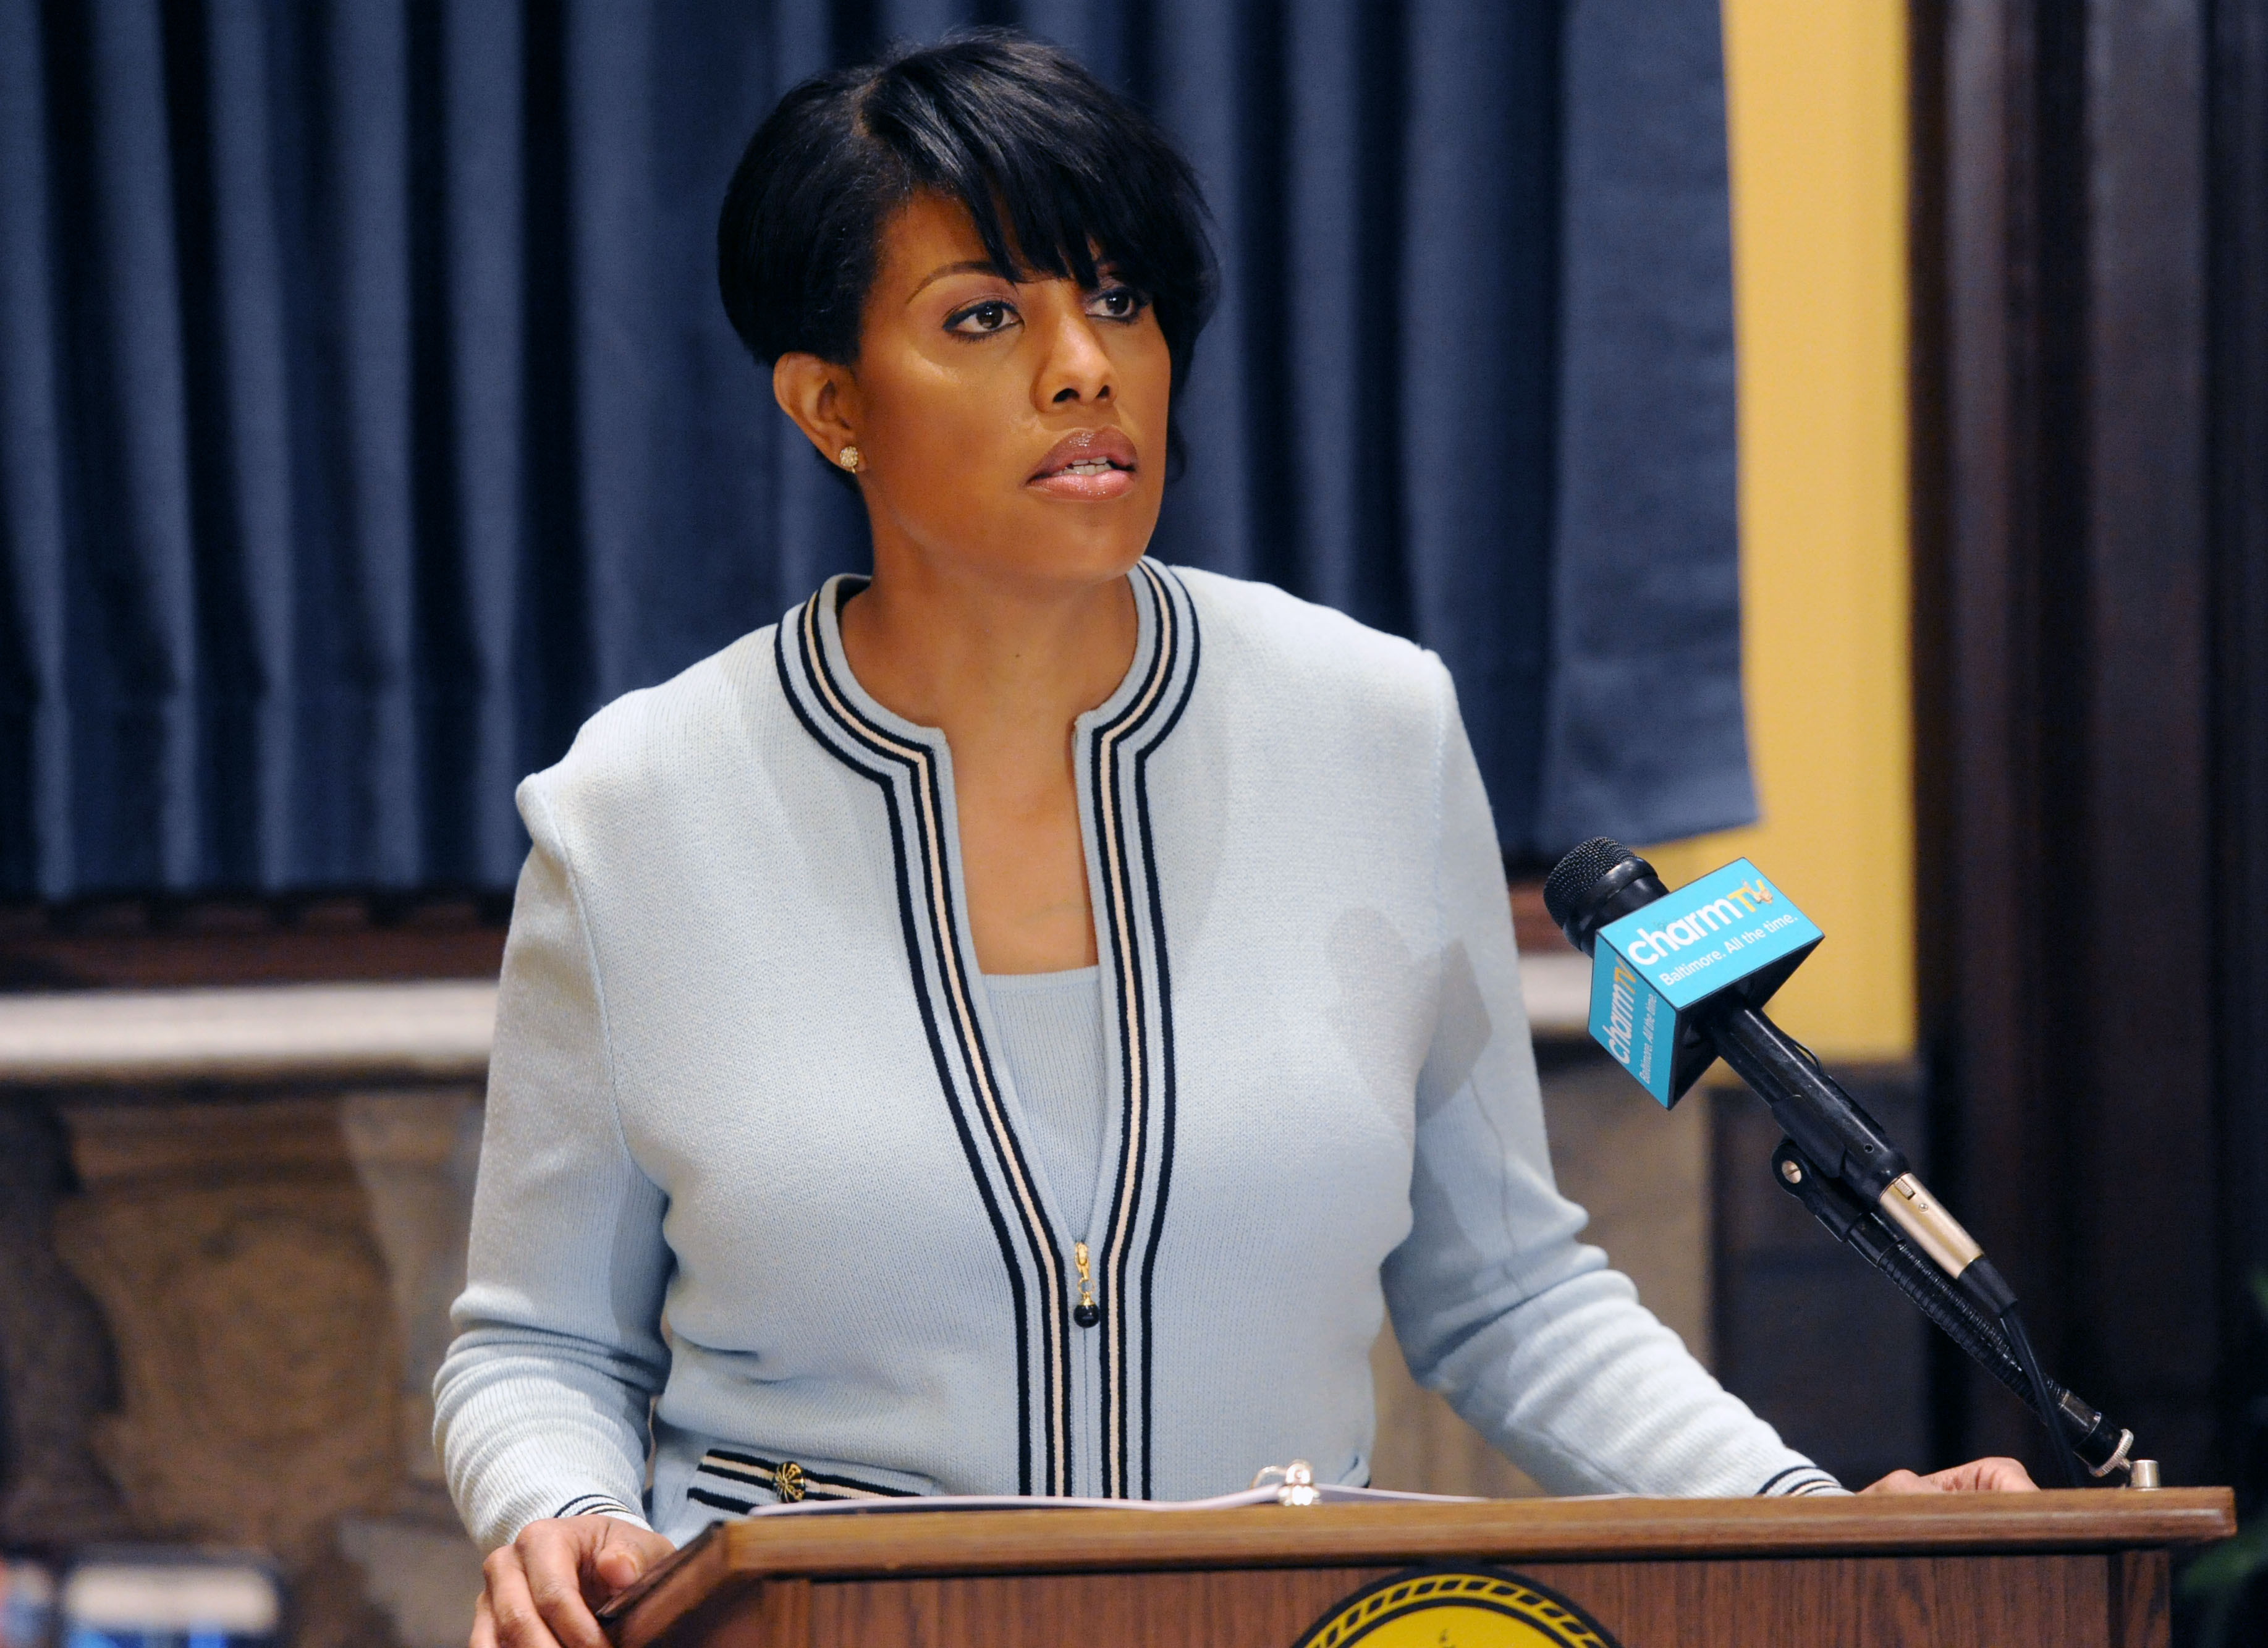 A new report suggests that Baltimore won't fully equip its police officers with body cameras for four years. Mayor Stephanie Rawlings-Blake, shown here at a May 6, 2015, news conference, says she wants them implemented by 2016. (Kim Hairston—AP)